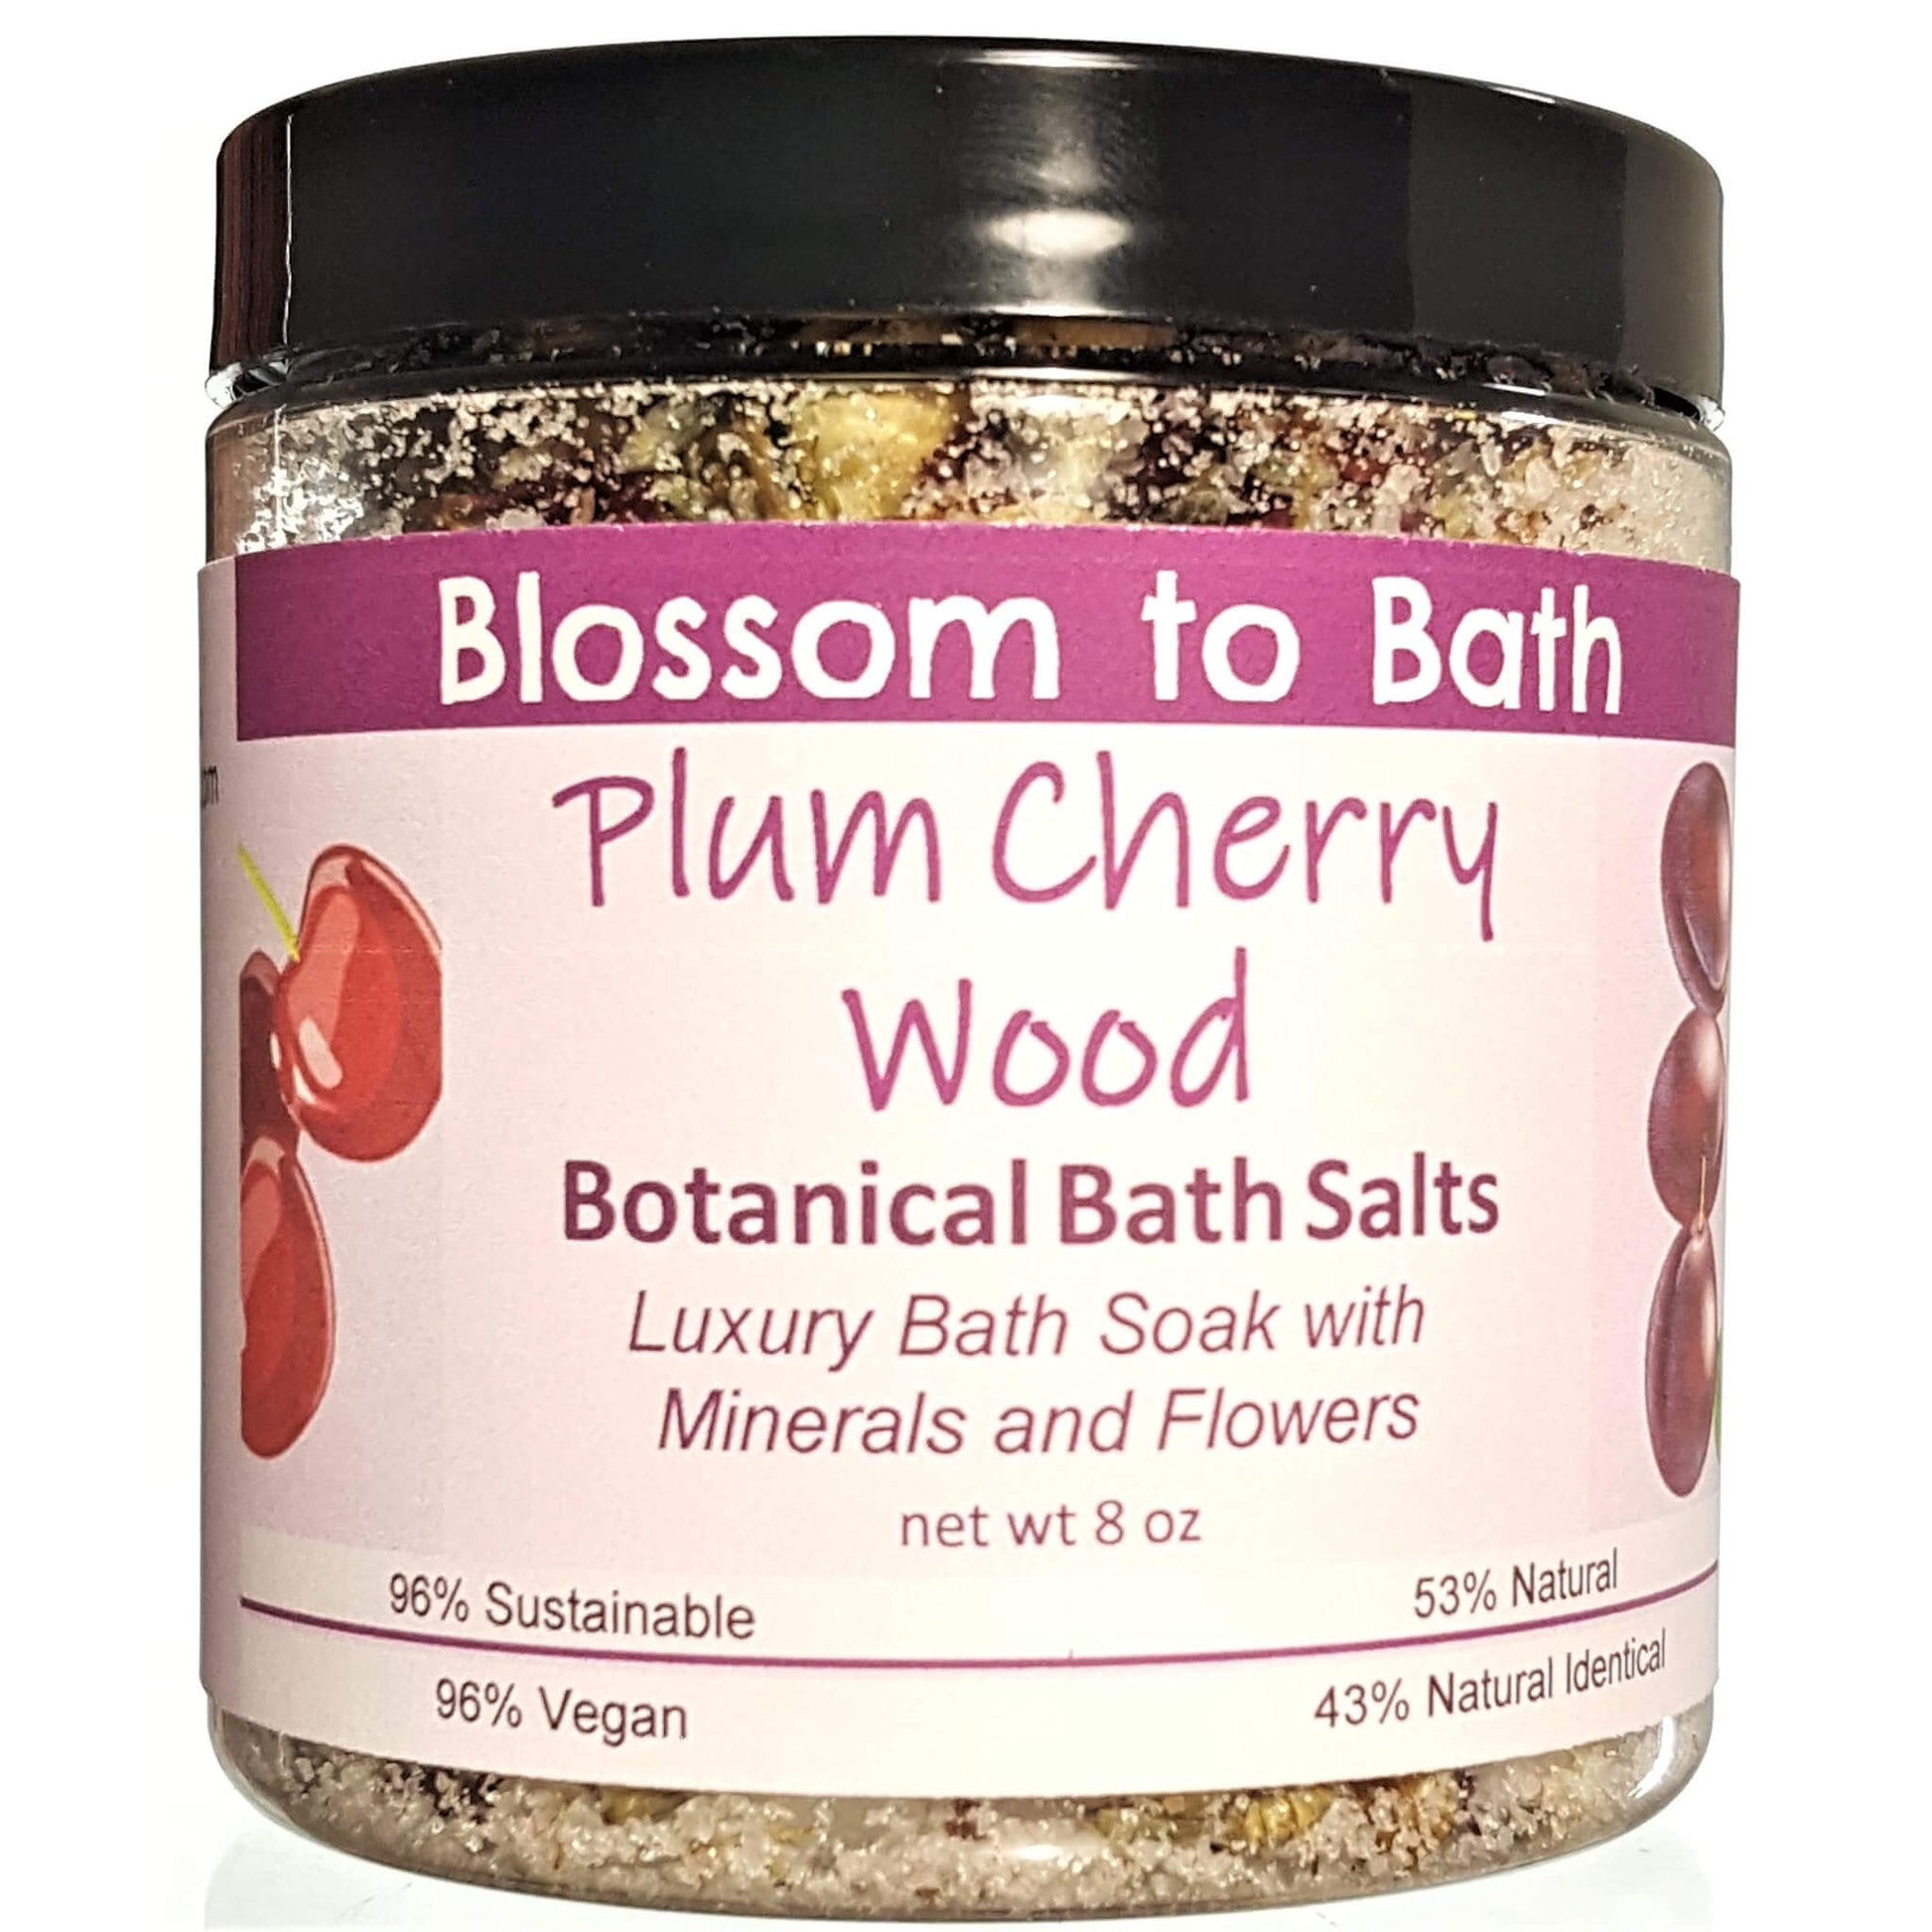 Buy Blossom to Bath Plum Cherry Wood Botanical Bath Salts from Flowersong Soap Studio.  A hand selected variety of skin loving botanicals and mineral rich salts for a unique, luxurious soaking experience  A charmingly sweet and woodsy fragrance.